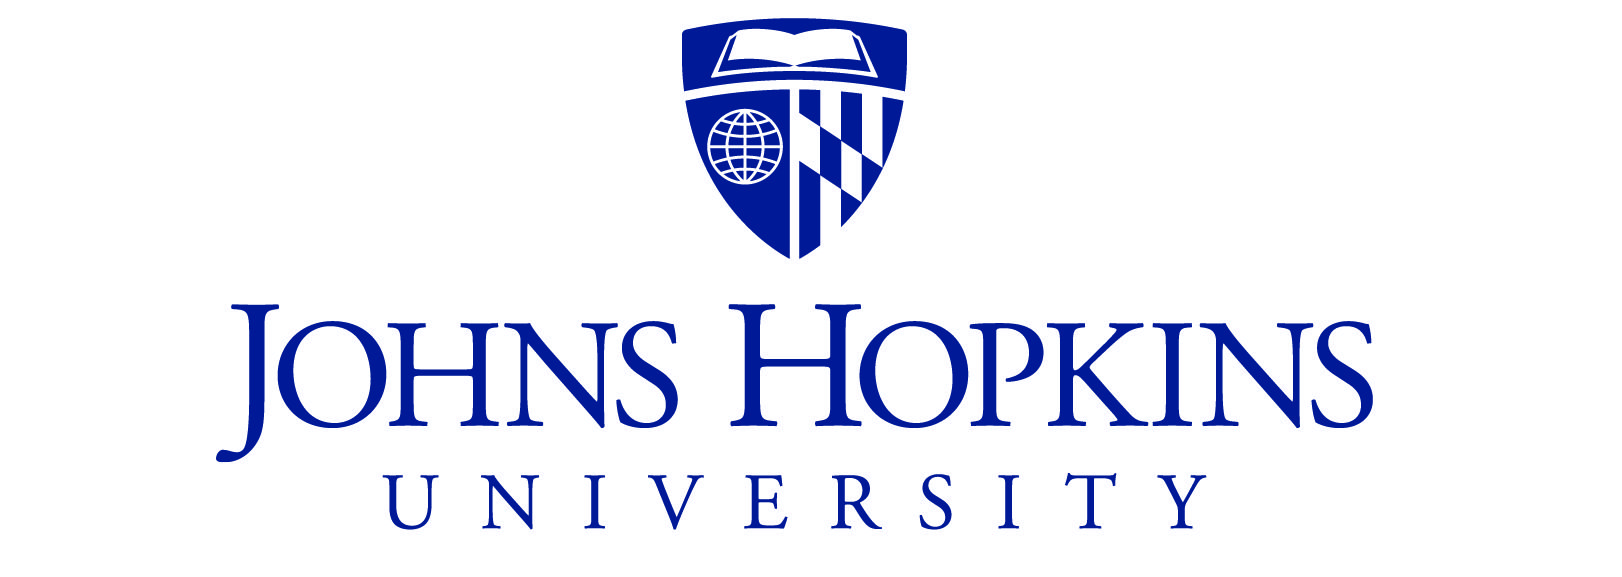 New contributors from the Johns Hopkins University